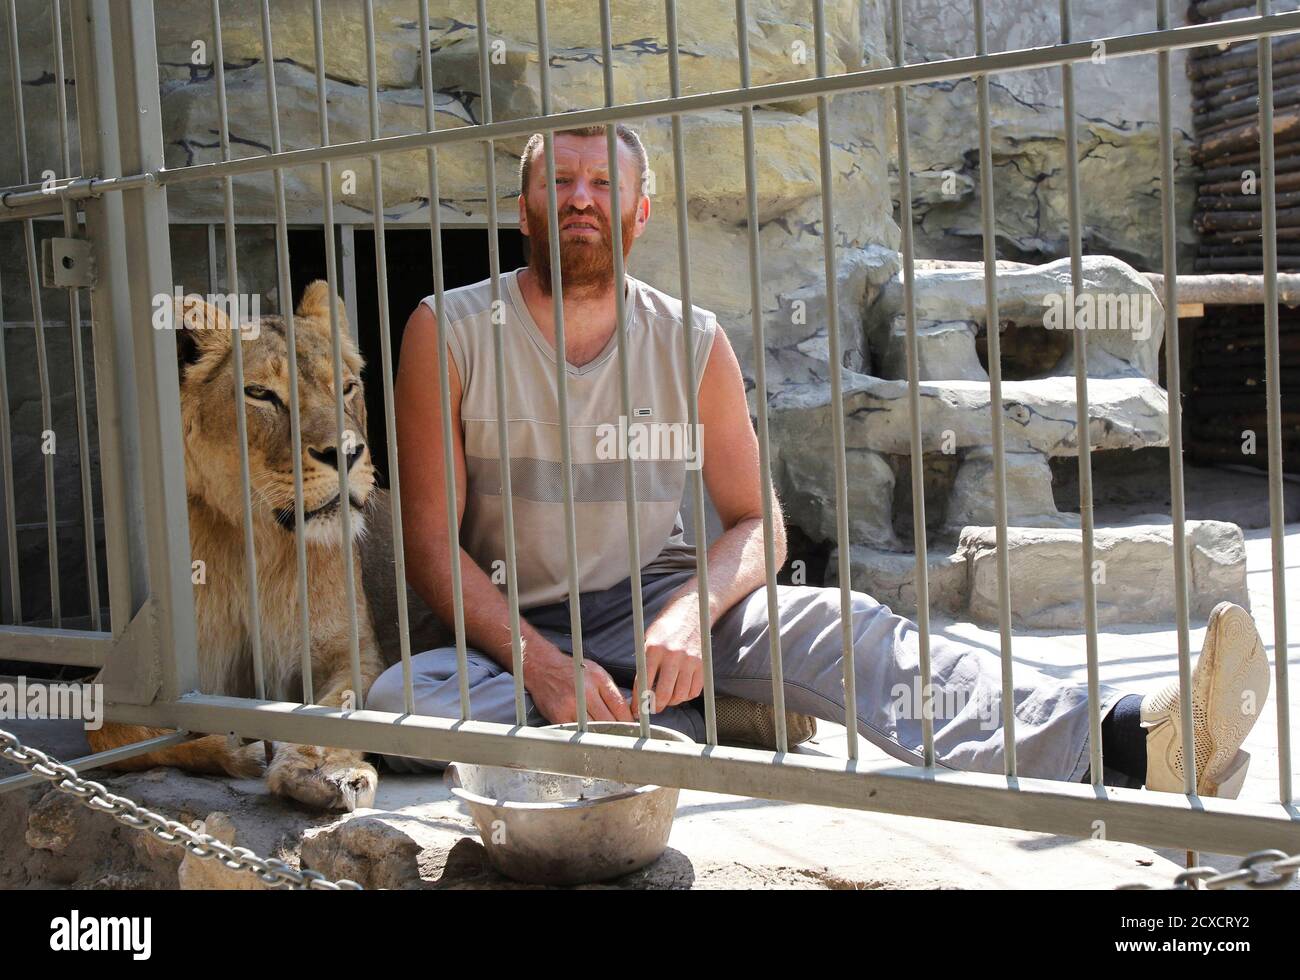 Zoo owner and artist Aleksandr Pylyshenko sits inside a cage with female  African lion Katya at a private zoo situated in his yard in the city of  Vasilyevka, southeastern Ukraine August 3,